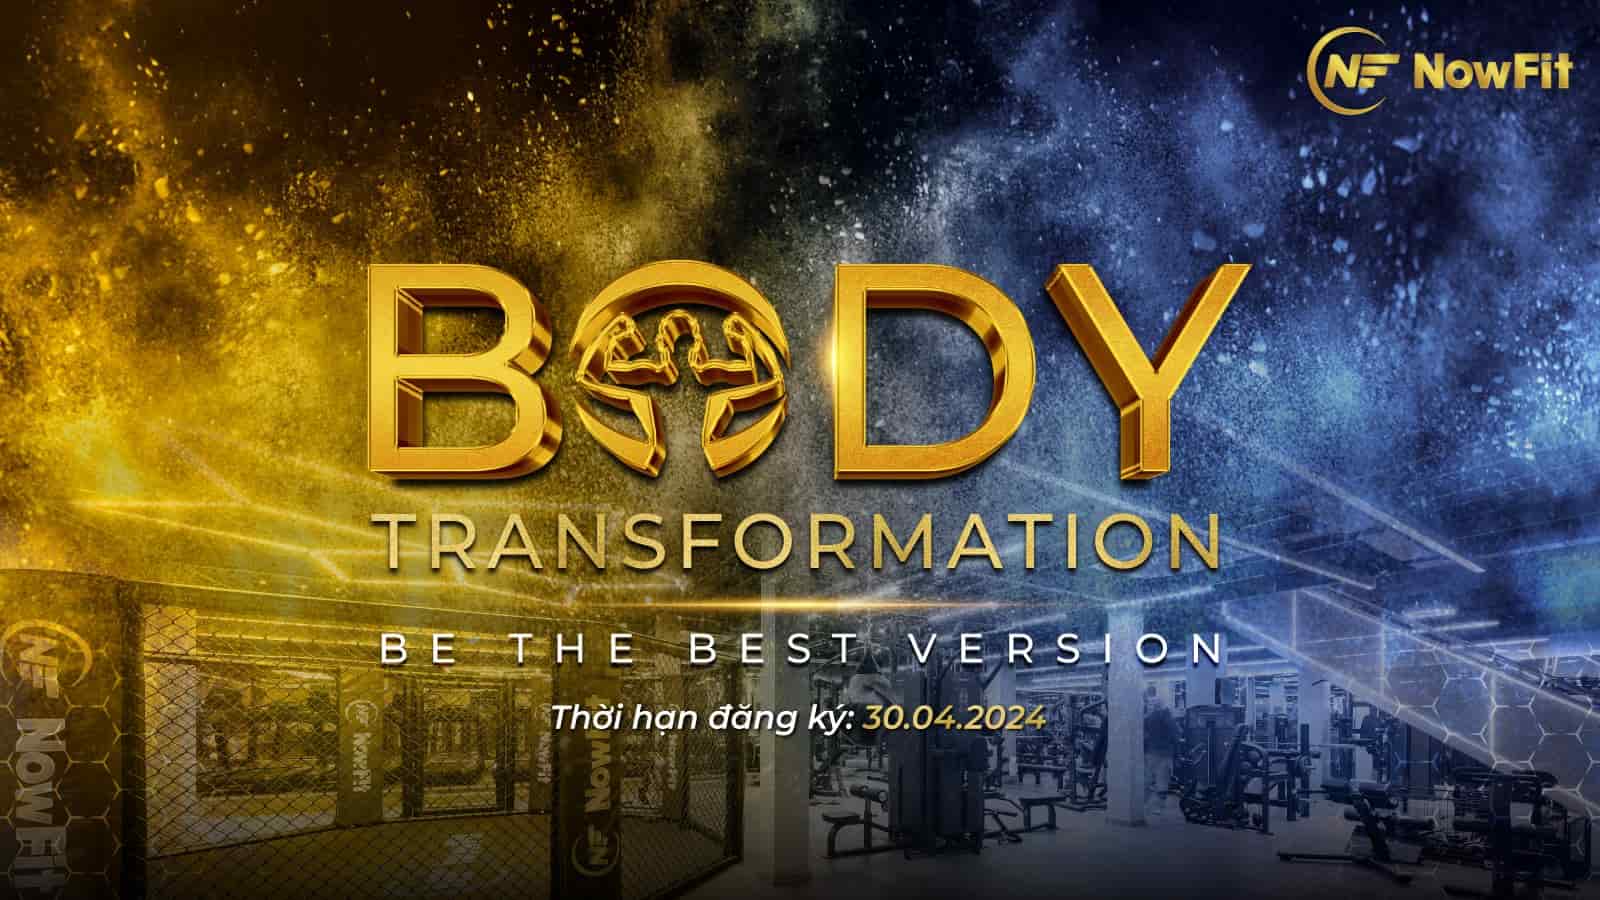 BODY TRANSFORMATION - BE THE BEST VERSION